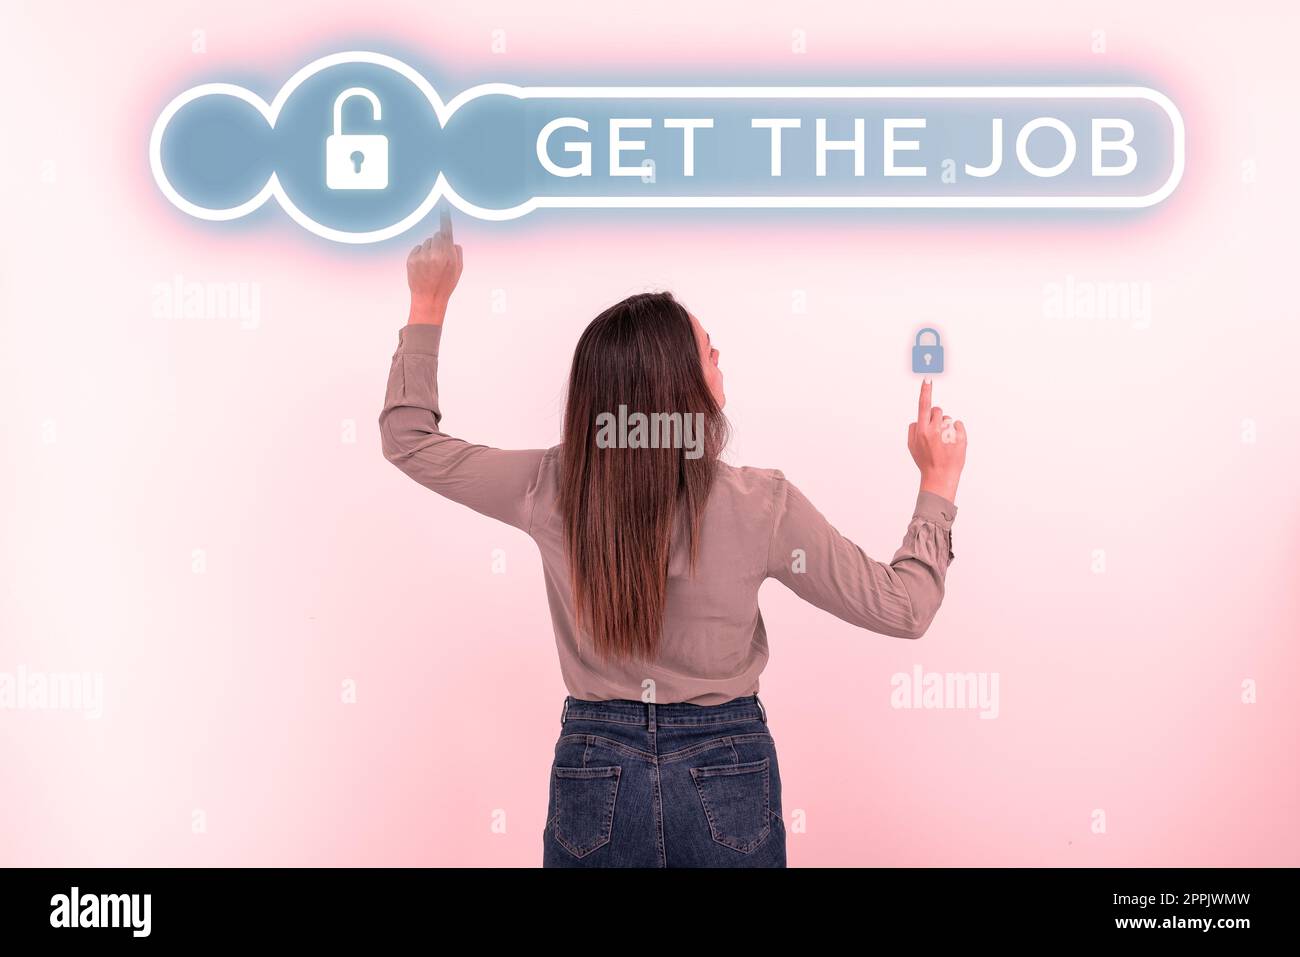 Text sign showing Get The Job. Word Written on Obtain position employment work Headhunting recruiting Stock Photo